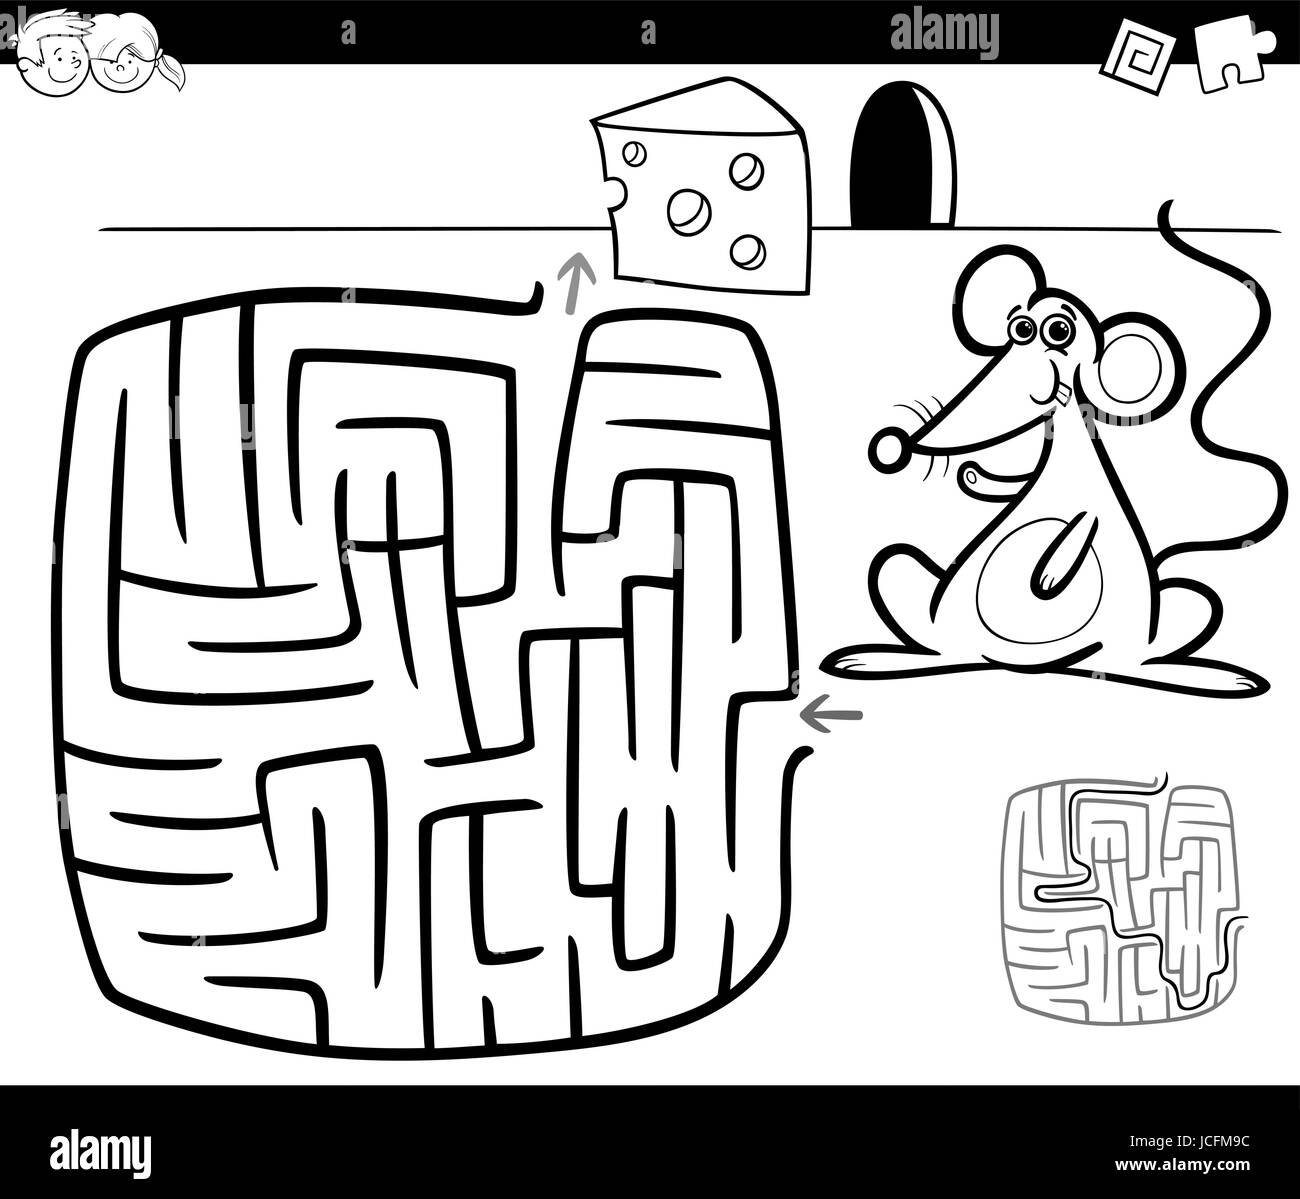 Black and White Cartoon Illustration of Education Maze or Labyrinth Game for Children with Mouse and Cheese Coloring Page Stock Vector